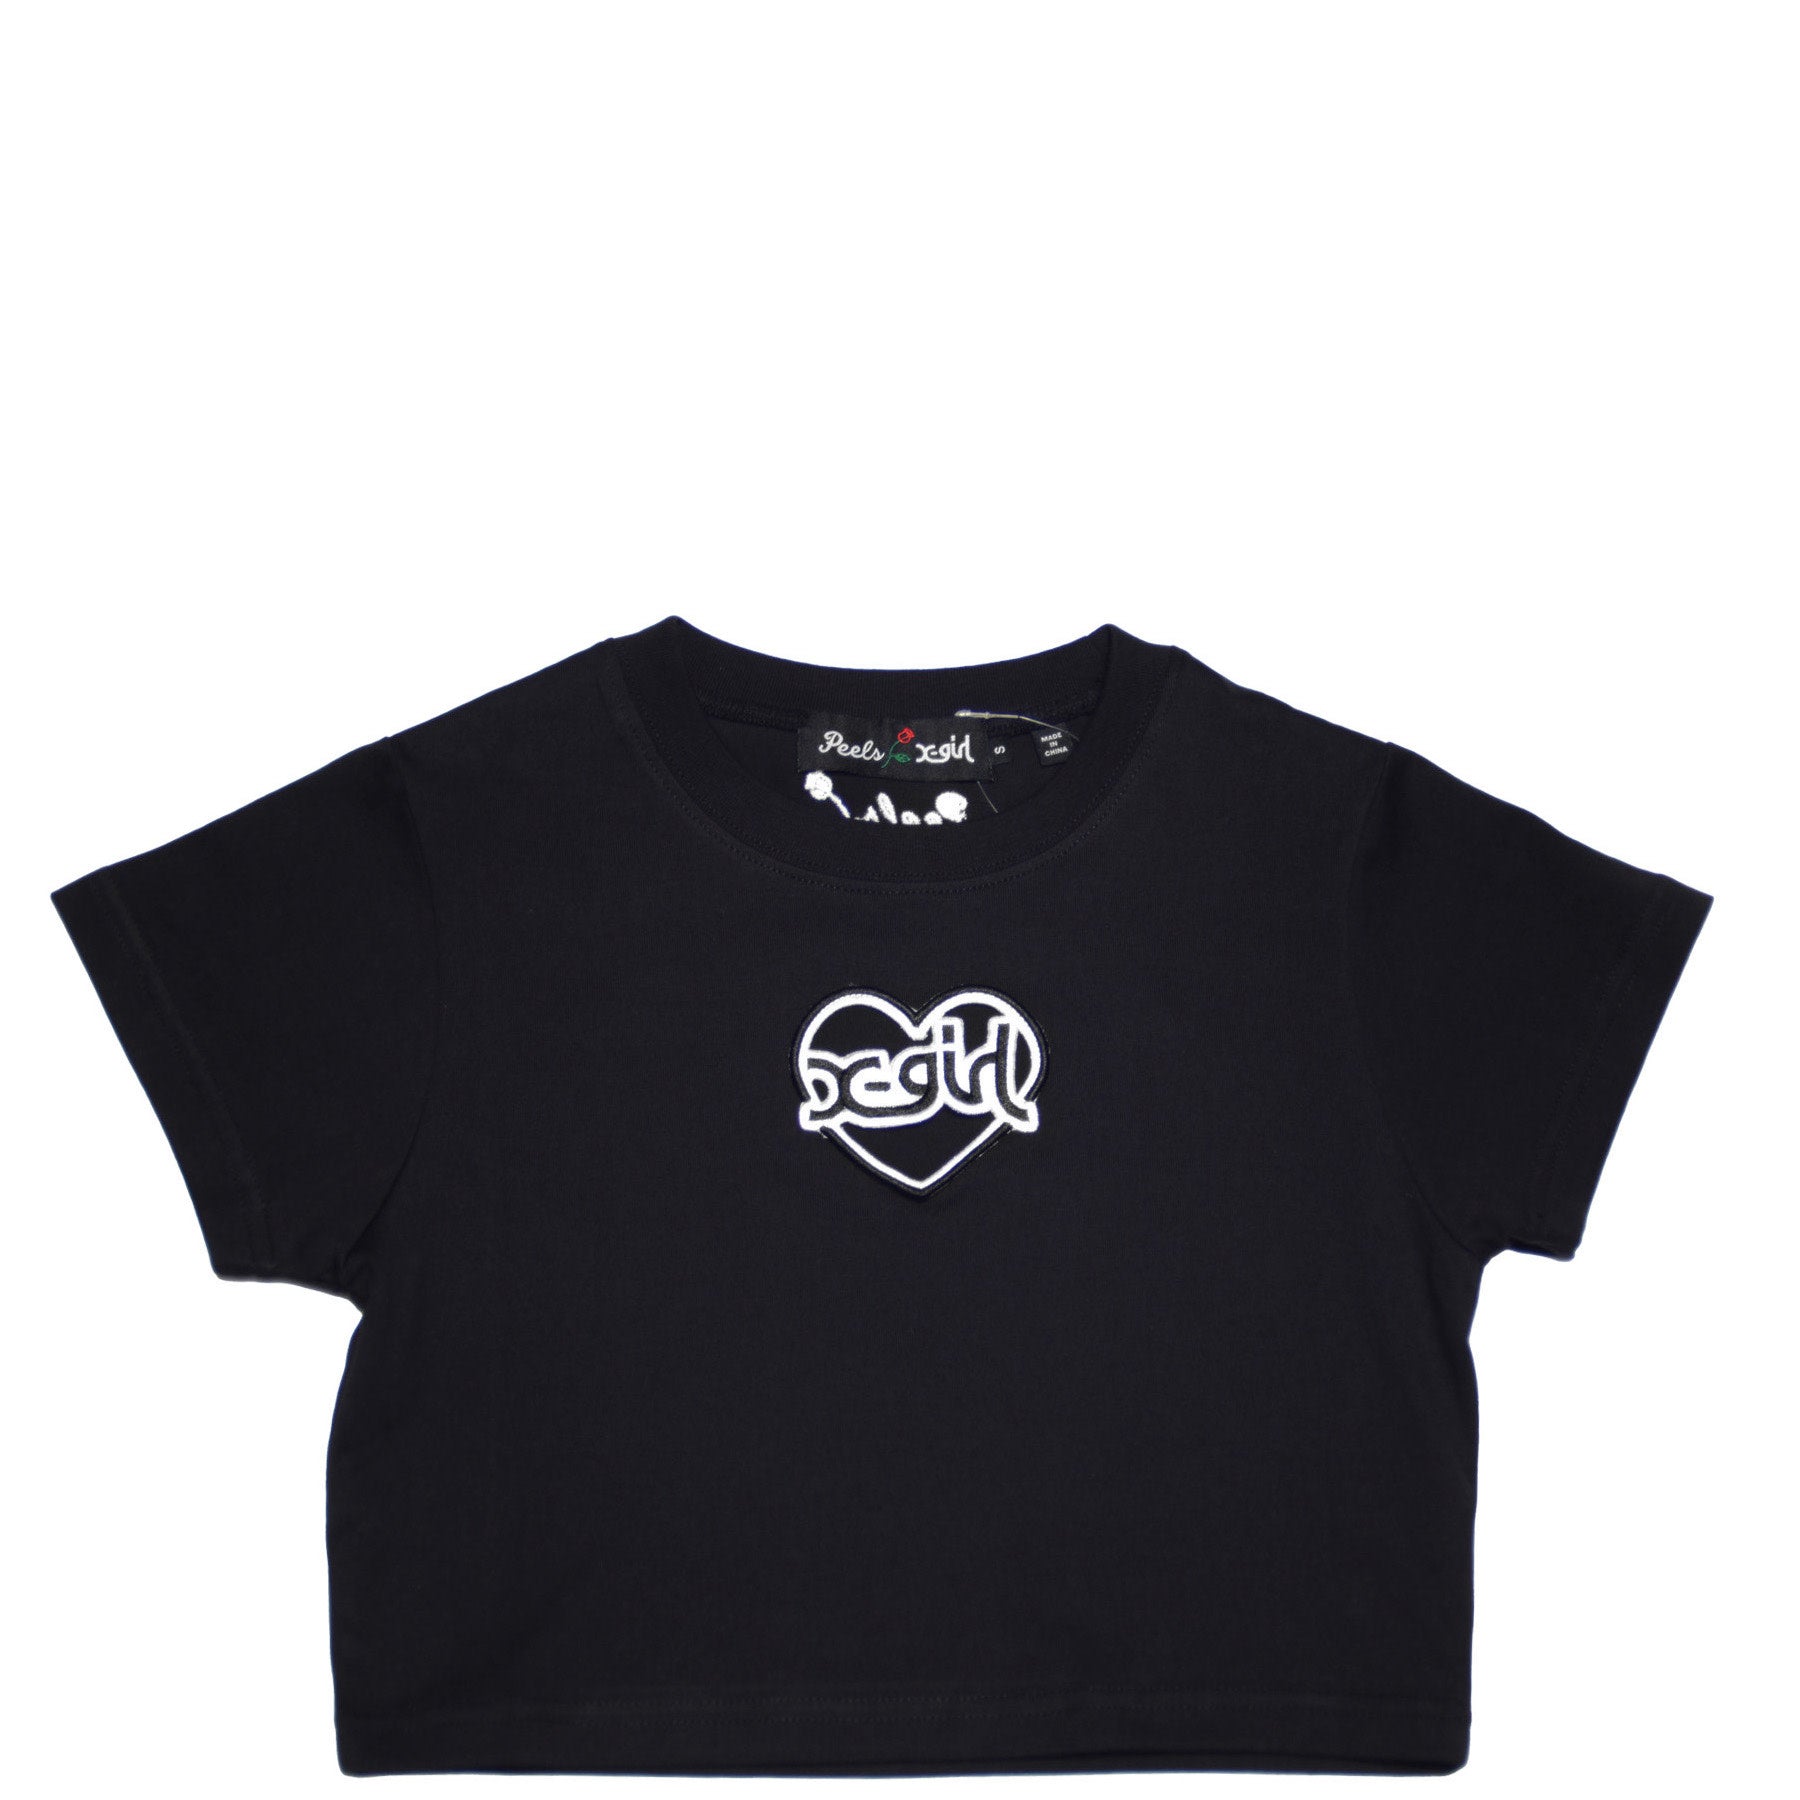 X-girl × PEELS Hollow Patch Cropped Tee - Black - KCDC Skateshop